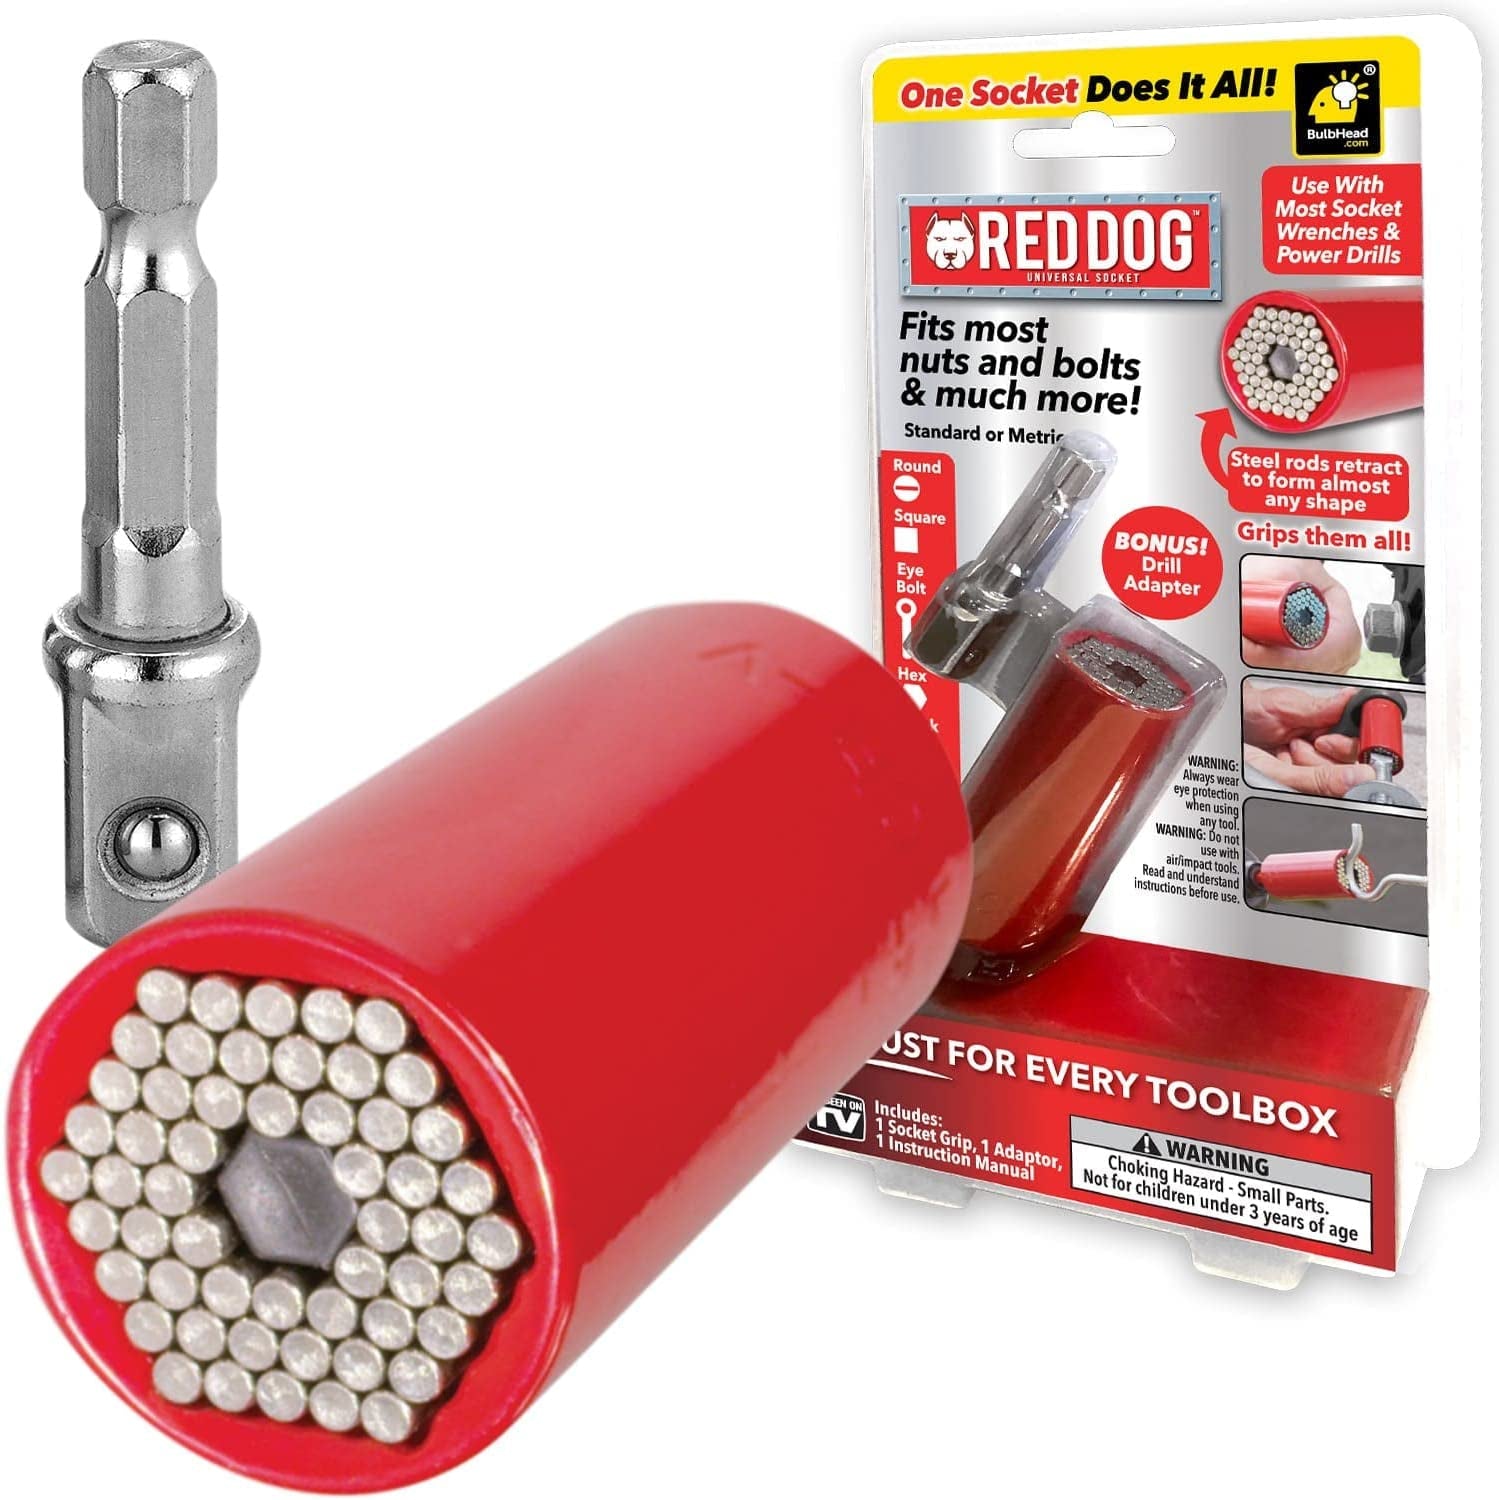 Red Dog Socket W/ Bonus Drill Adapter AS-SEEN-ON-TV, Fits Most Nuts, Bolts, Use with Most Socket Wrenches & Power Drills, Steel Rods Retract to Form Almost Any Shape, Standard or Metric, 2 In.